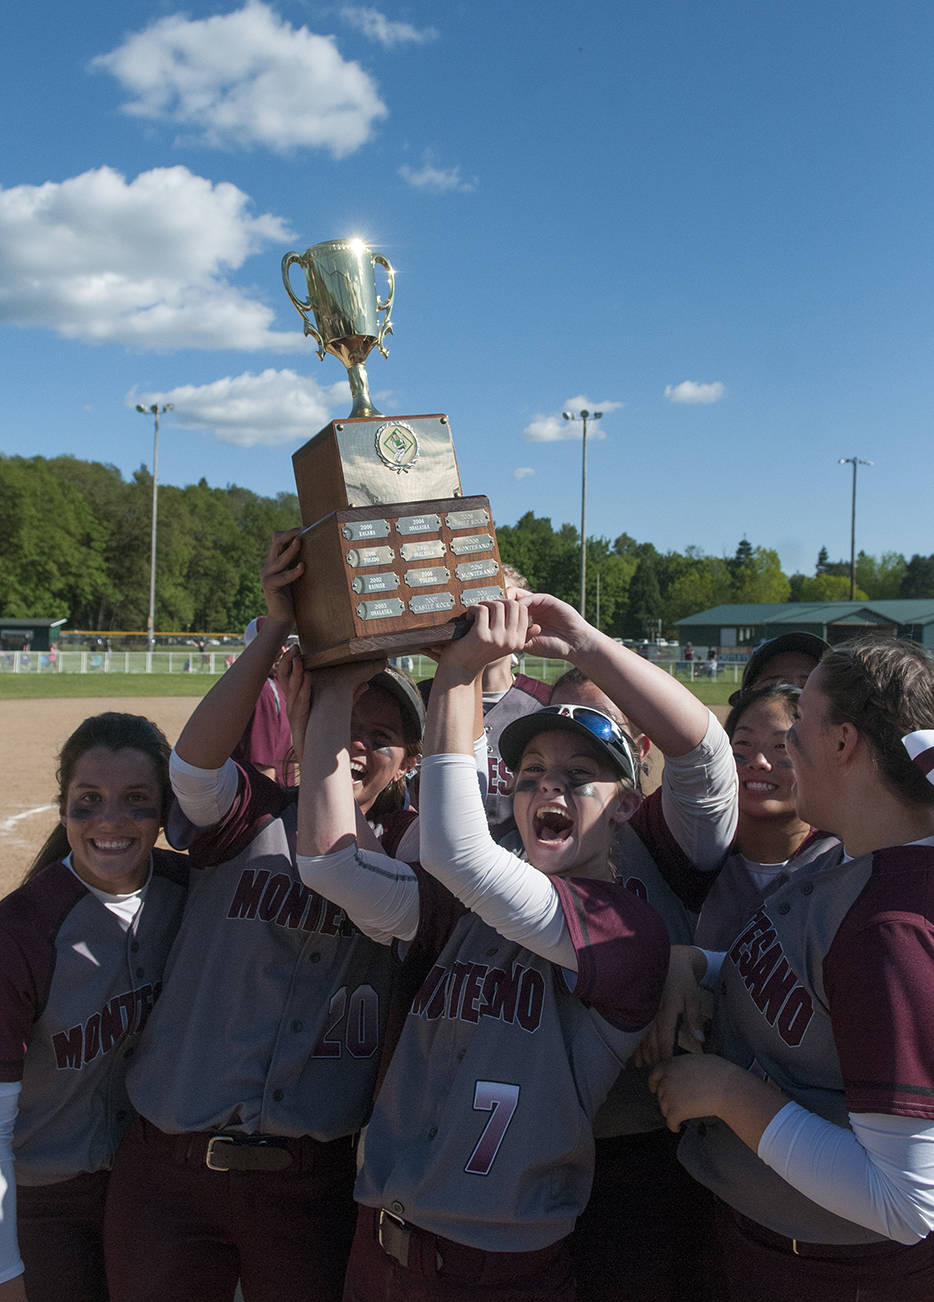 (Brendan Carl | Grays Harbor Newspaper Group) Montesano’s Cheyann Bartlett (7) and Josie Toyra hoist the district title trophy after the Bulldogs defeated La Center 5-0 on Saturday.